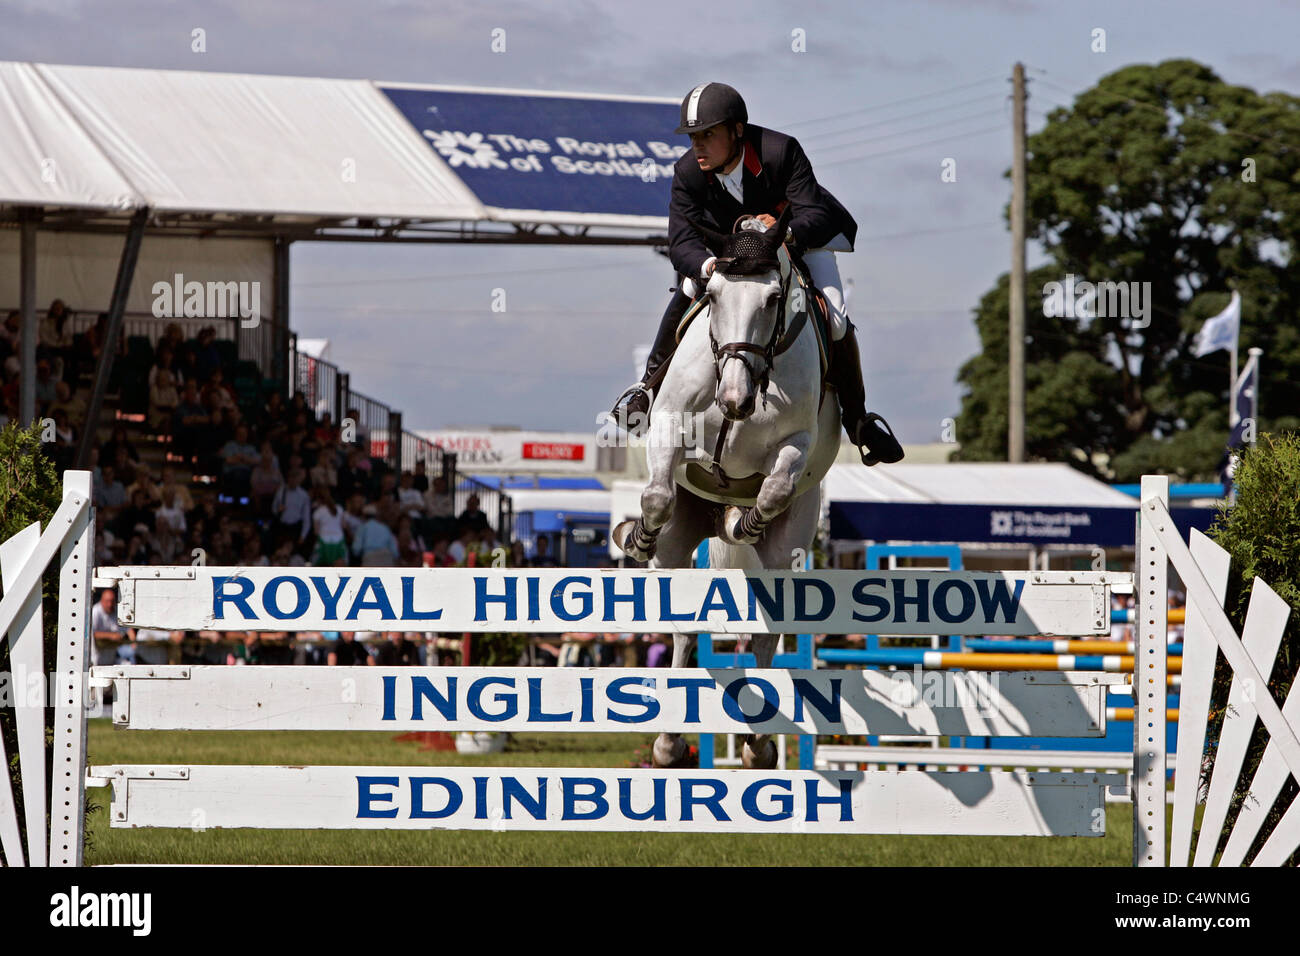 Show Jumping at the Royal Highland Show, Ingliston, Édimbourg Banque D'Images